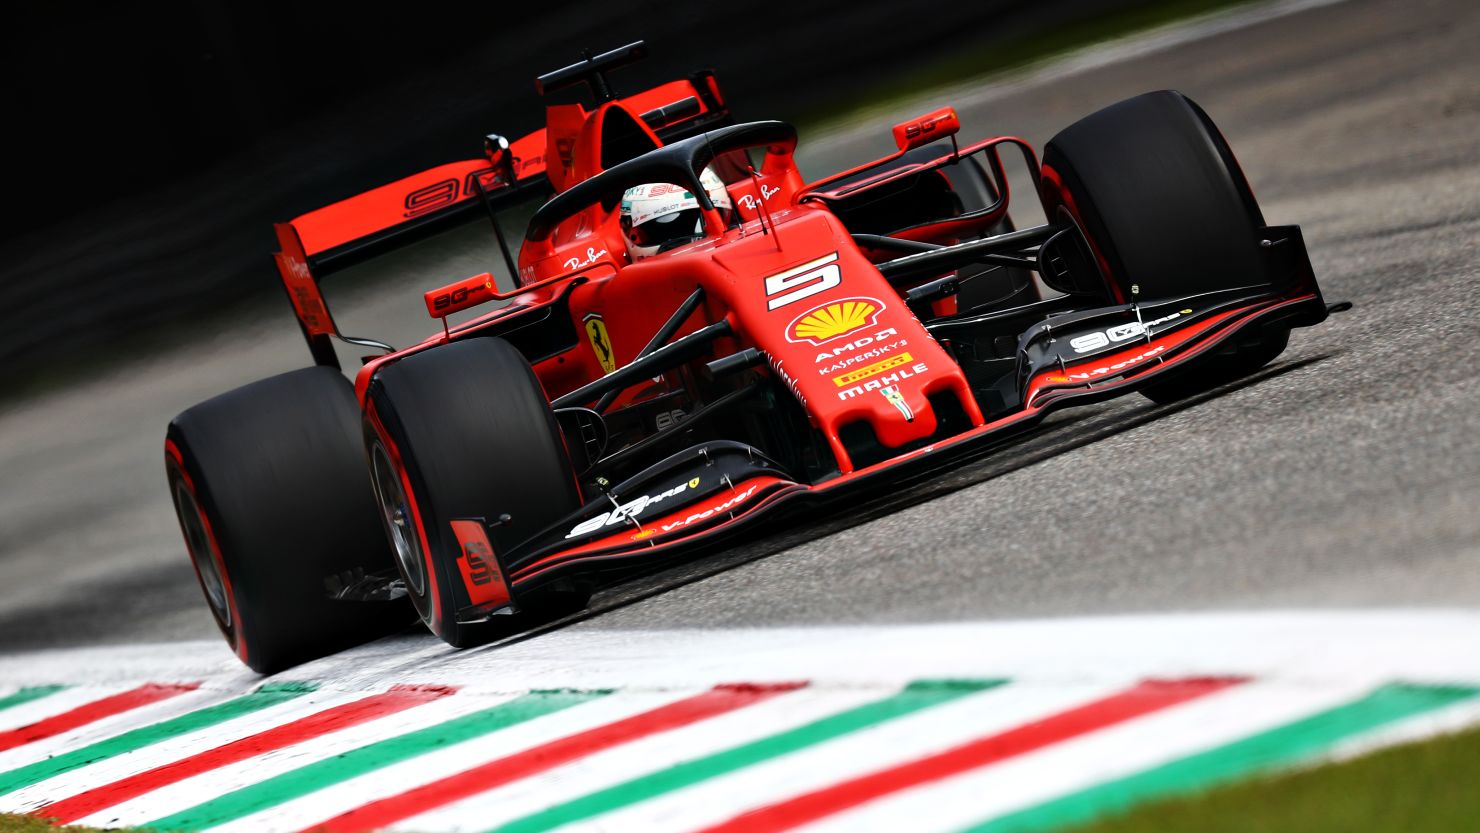 Sebastian Vettel was fastest during the final F1 practice session in Monza. 